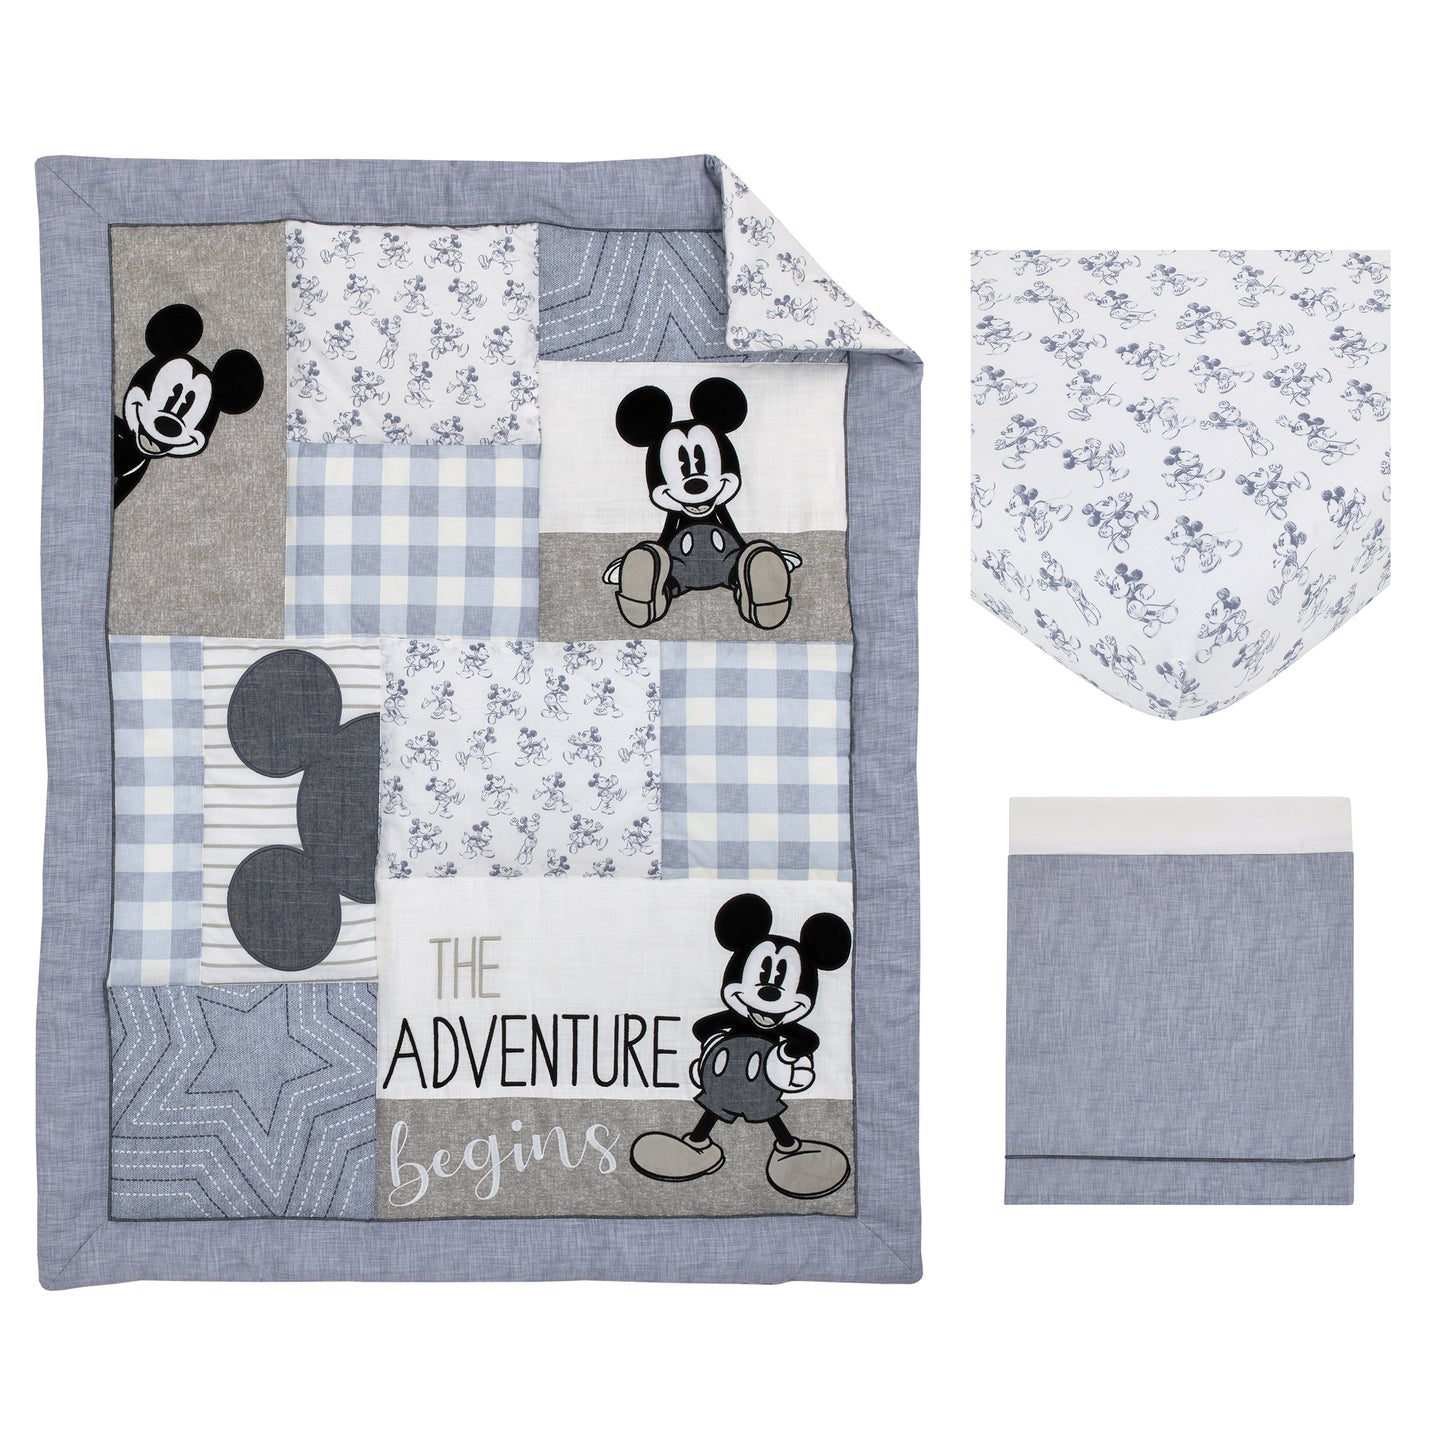 Disney Mickey Mouse - Call Me Mickey Blue, White, and Gray The Adventure Begins Stars and Gingham 3 Piece Nursery Crib Bedding Set - Comforter, 100% Cotton Fitted Crib Sheet, and Crib Skirt